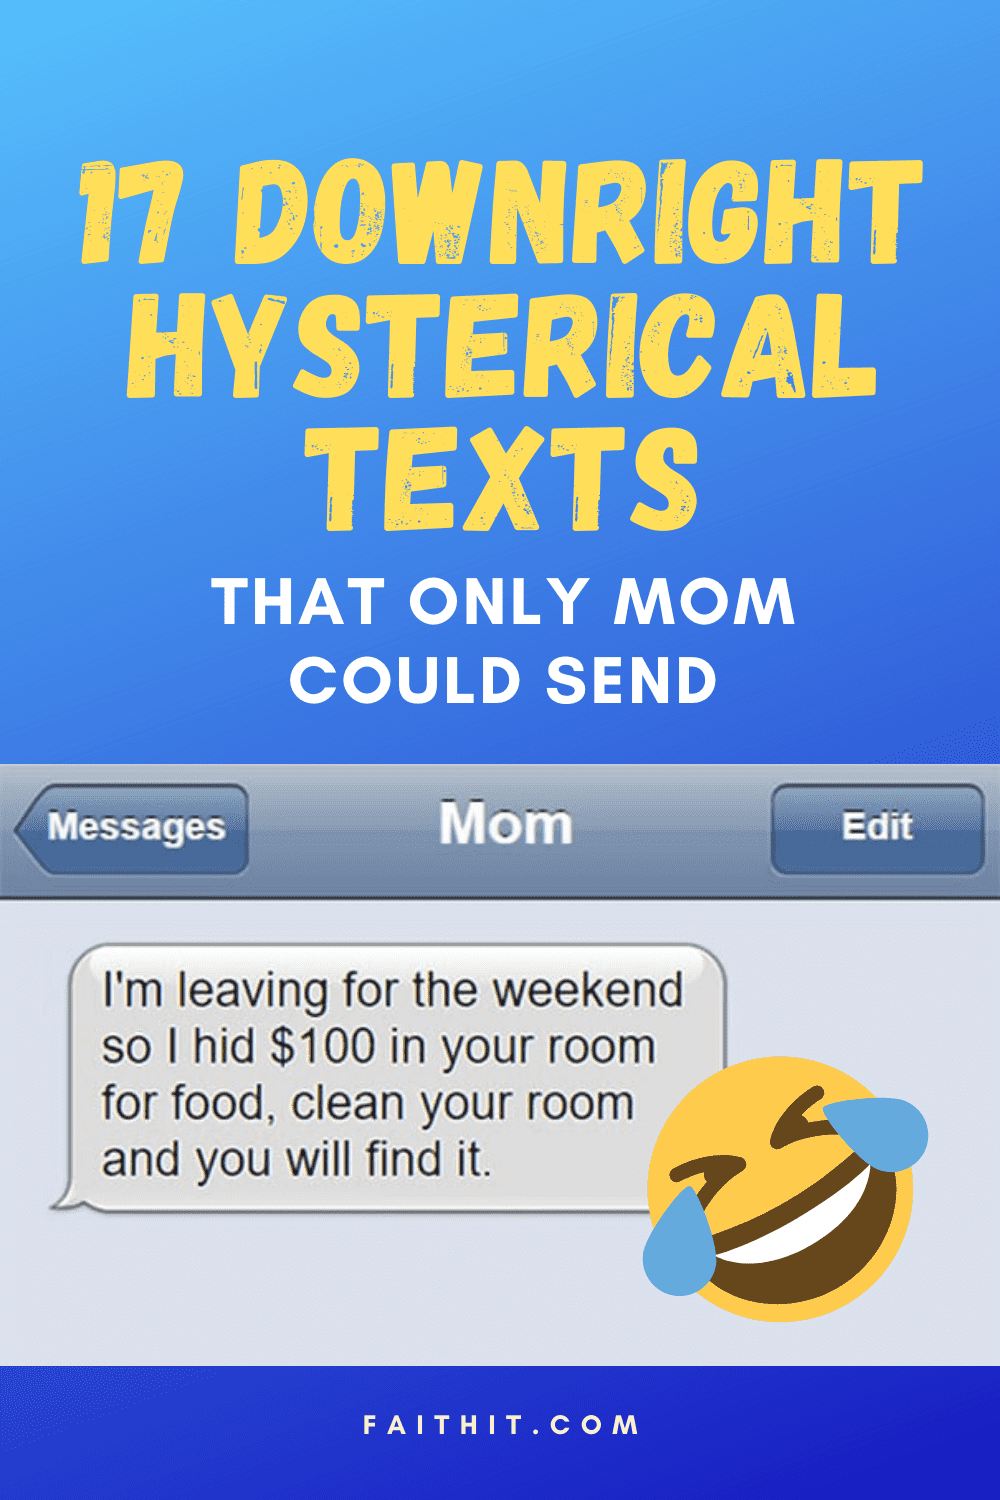 hysterical texts